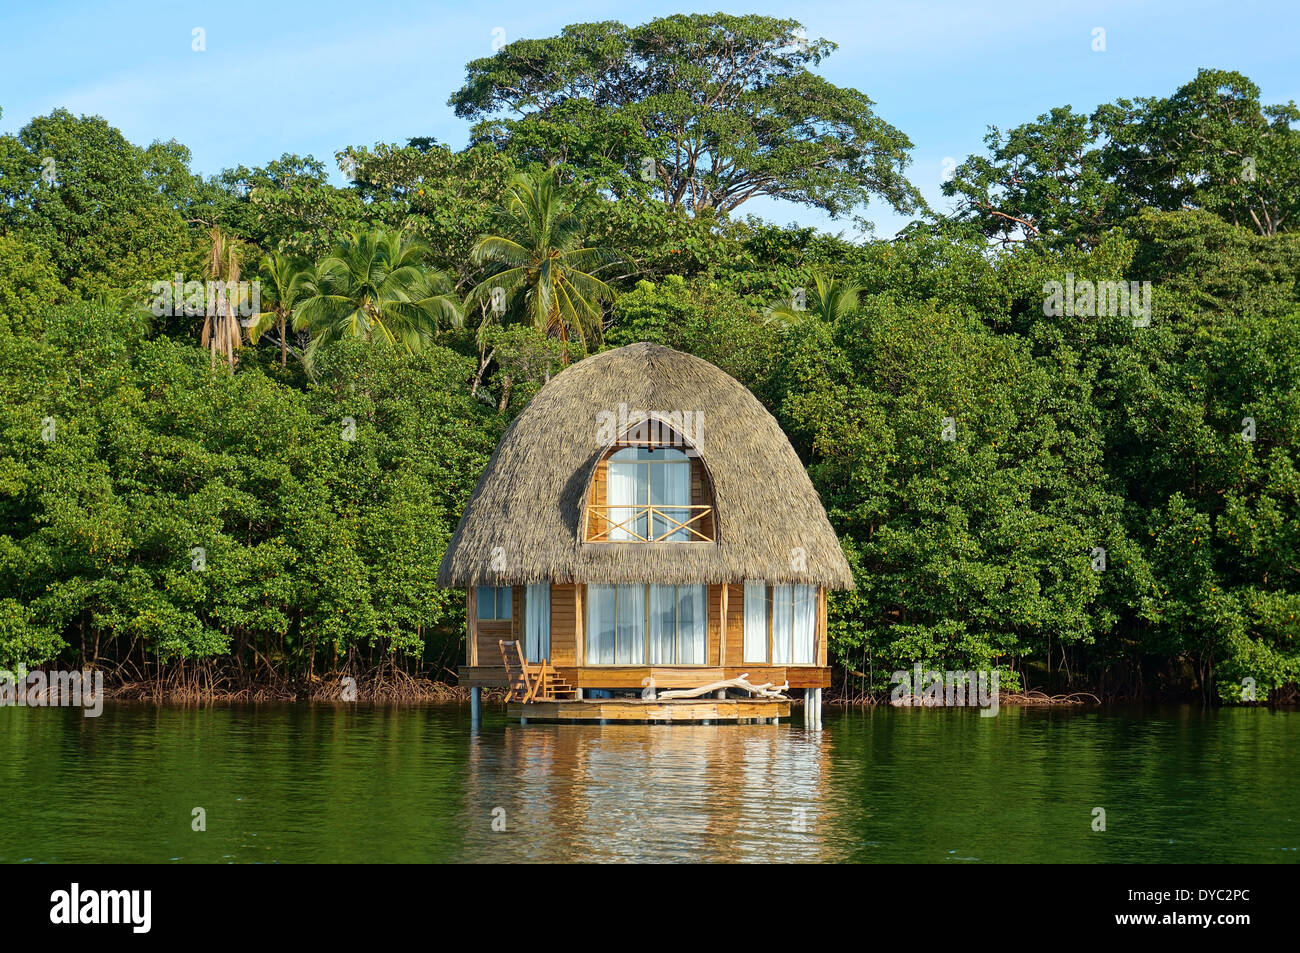 Tropical bungalow over water with thatched palm roof and lush vegetation in background, Bocas del Toro, Caribbean sea, Panama Stock Photo